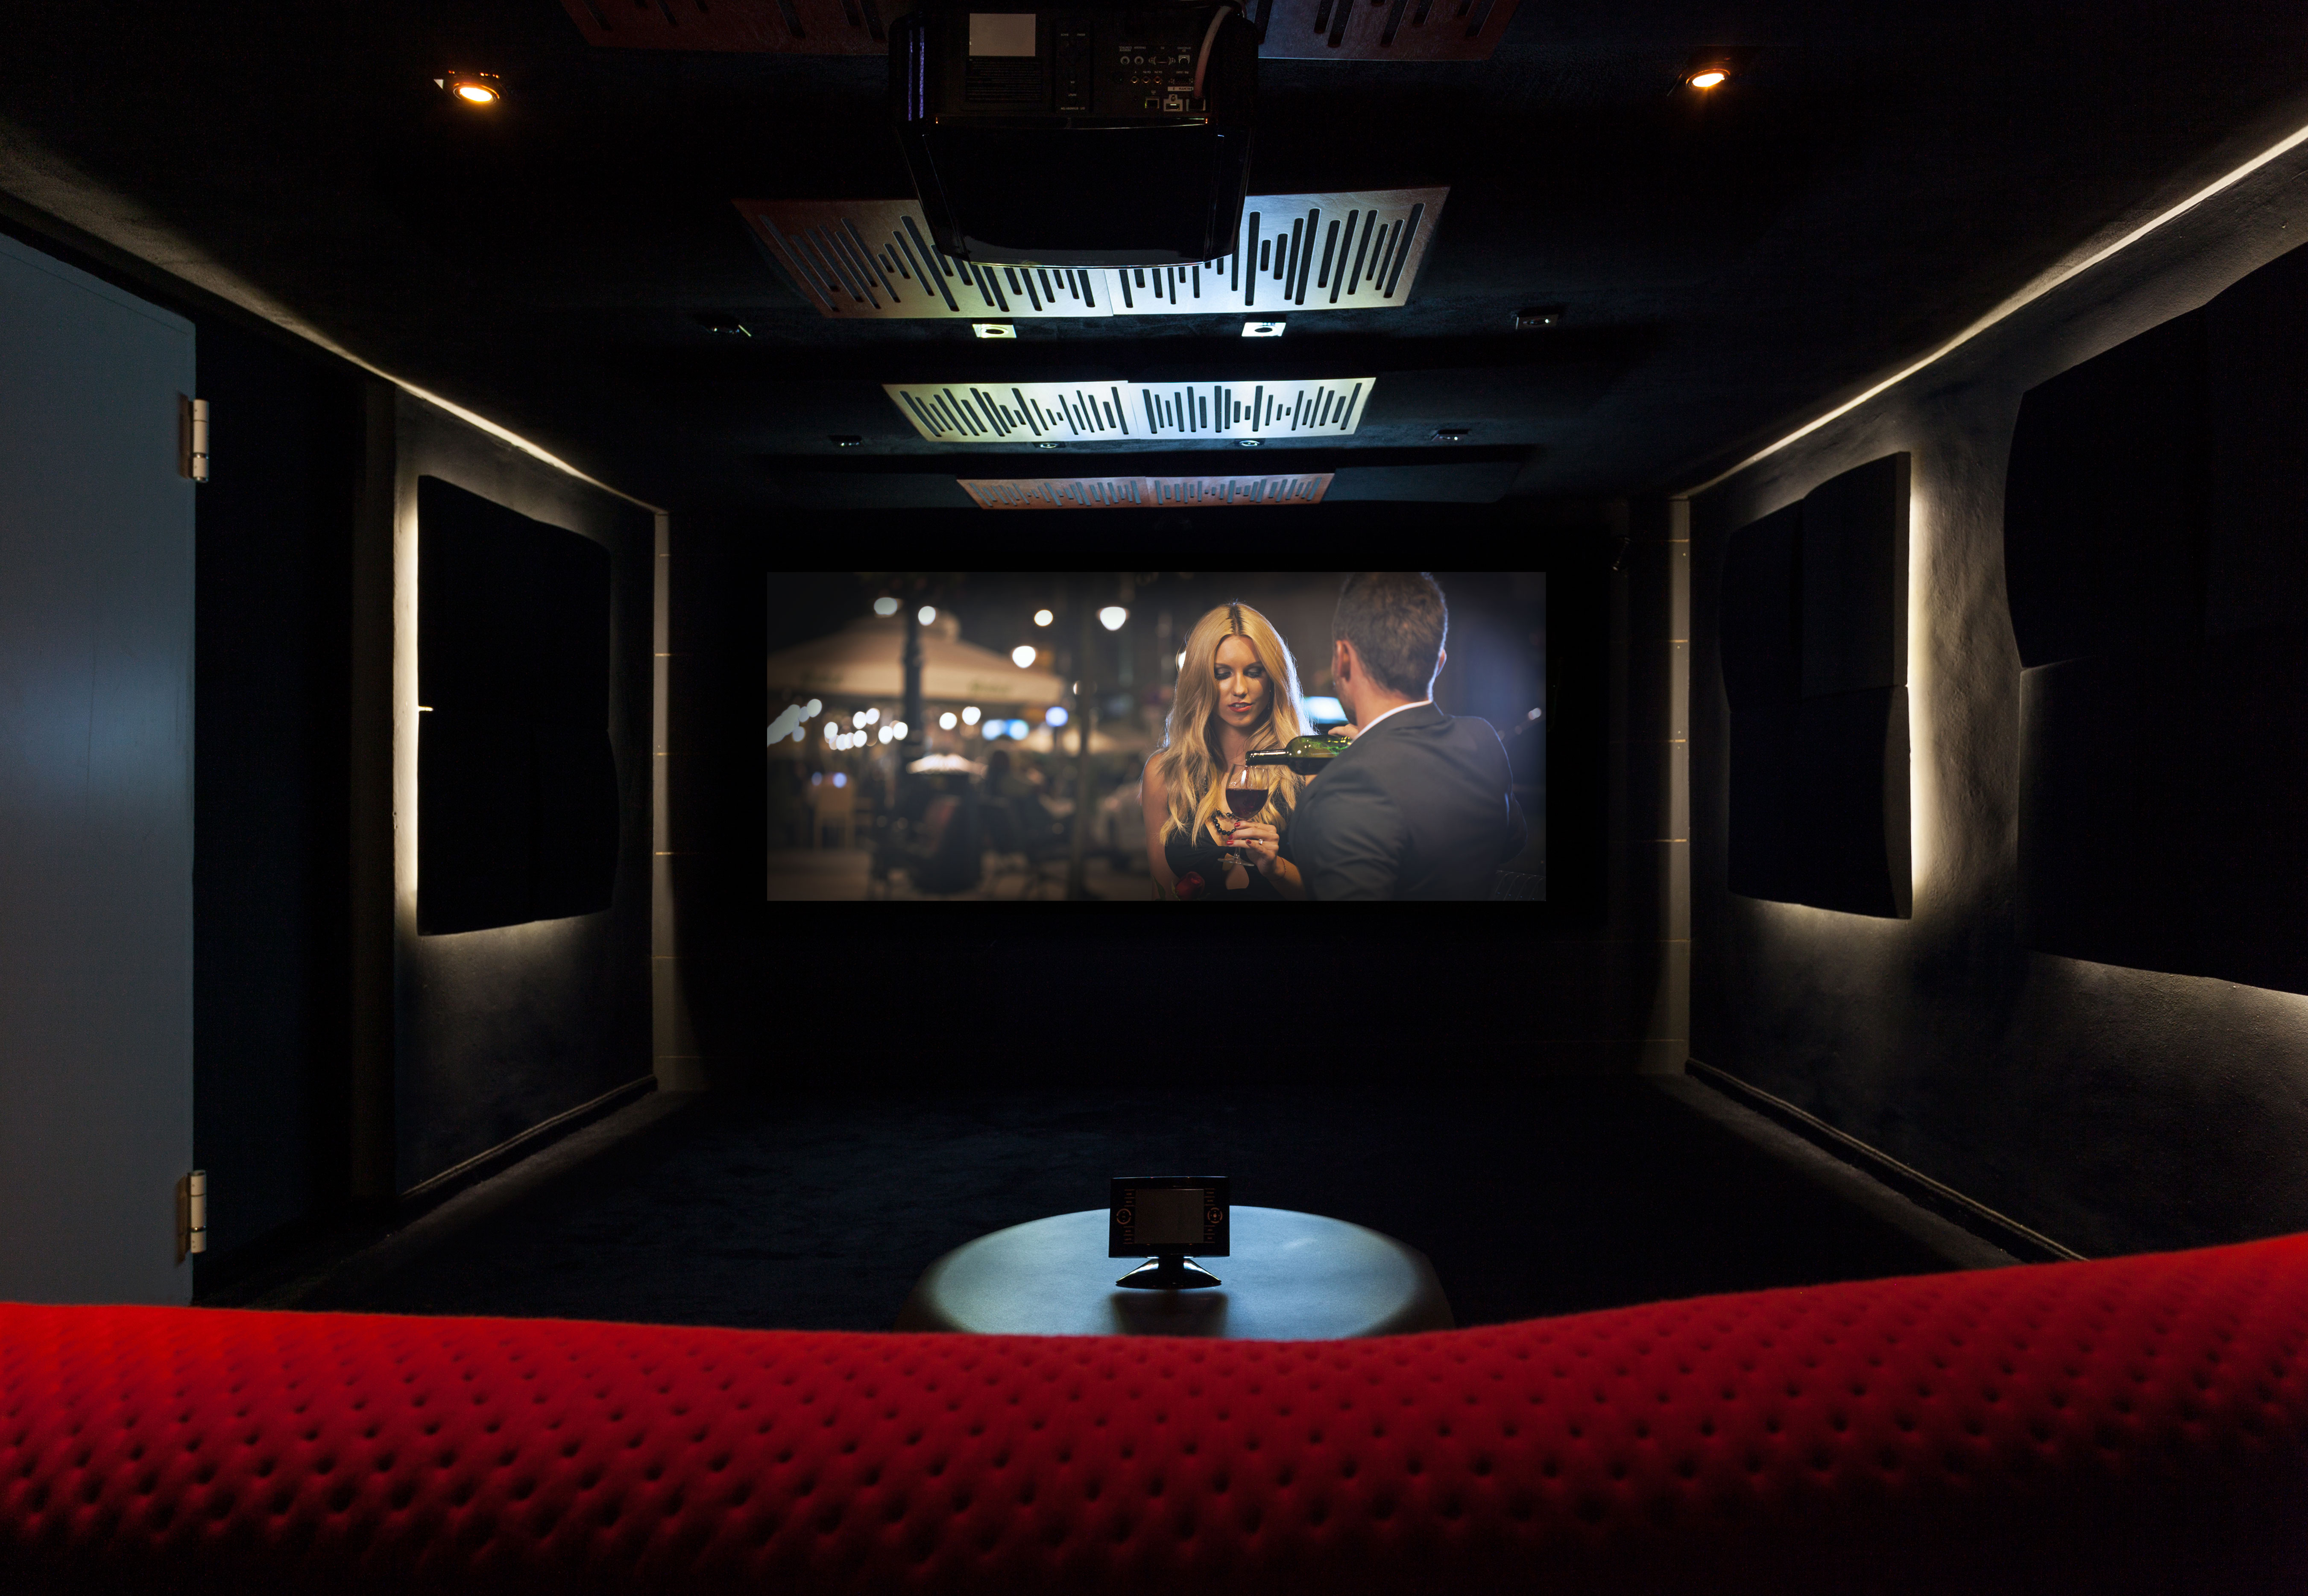 Introducing CinemaTech, The Gold Standard in Home Theater Design